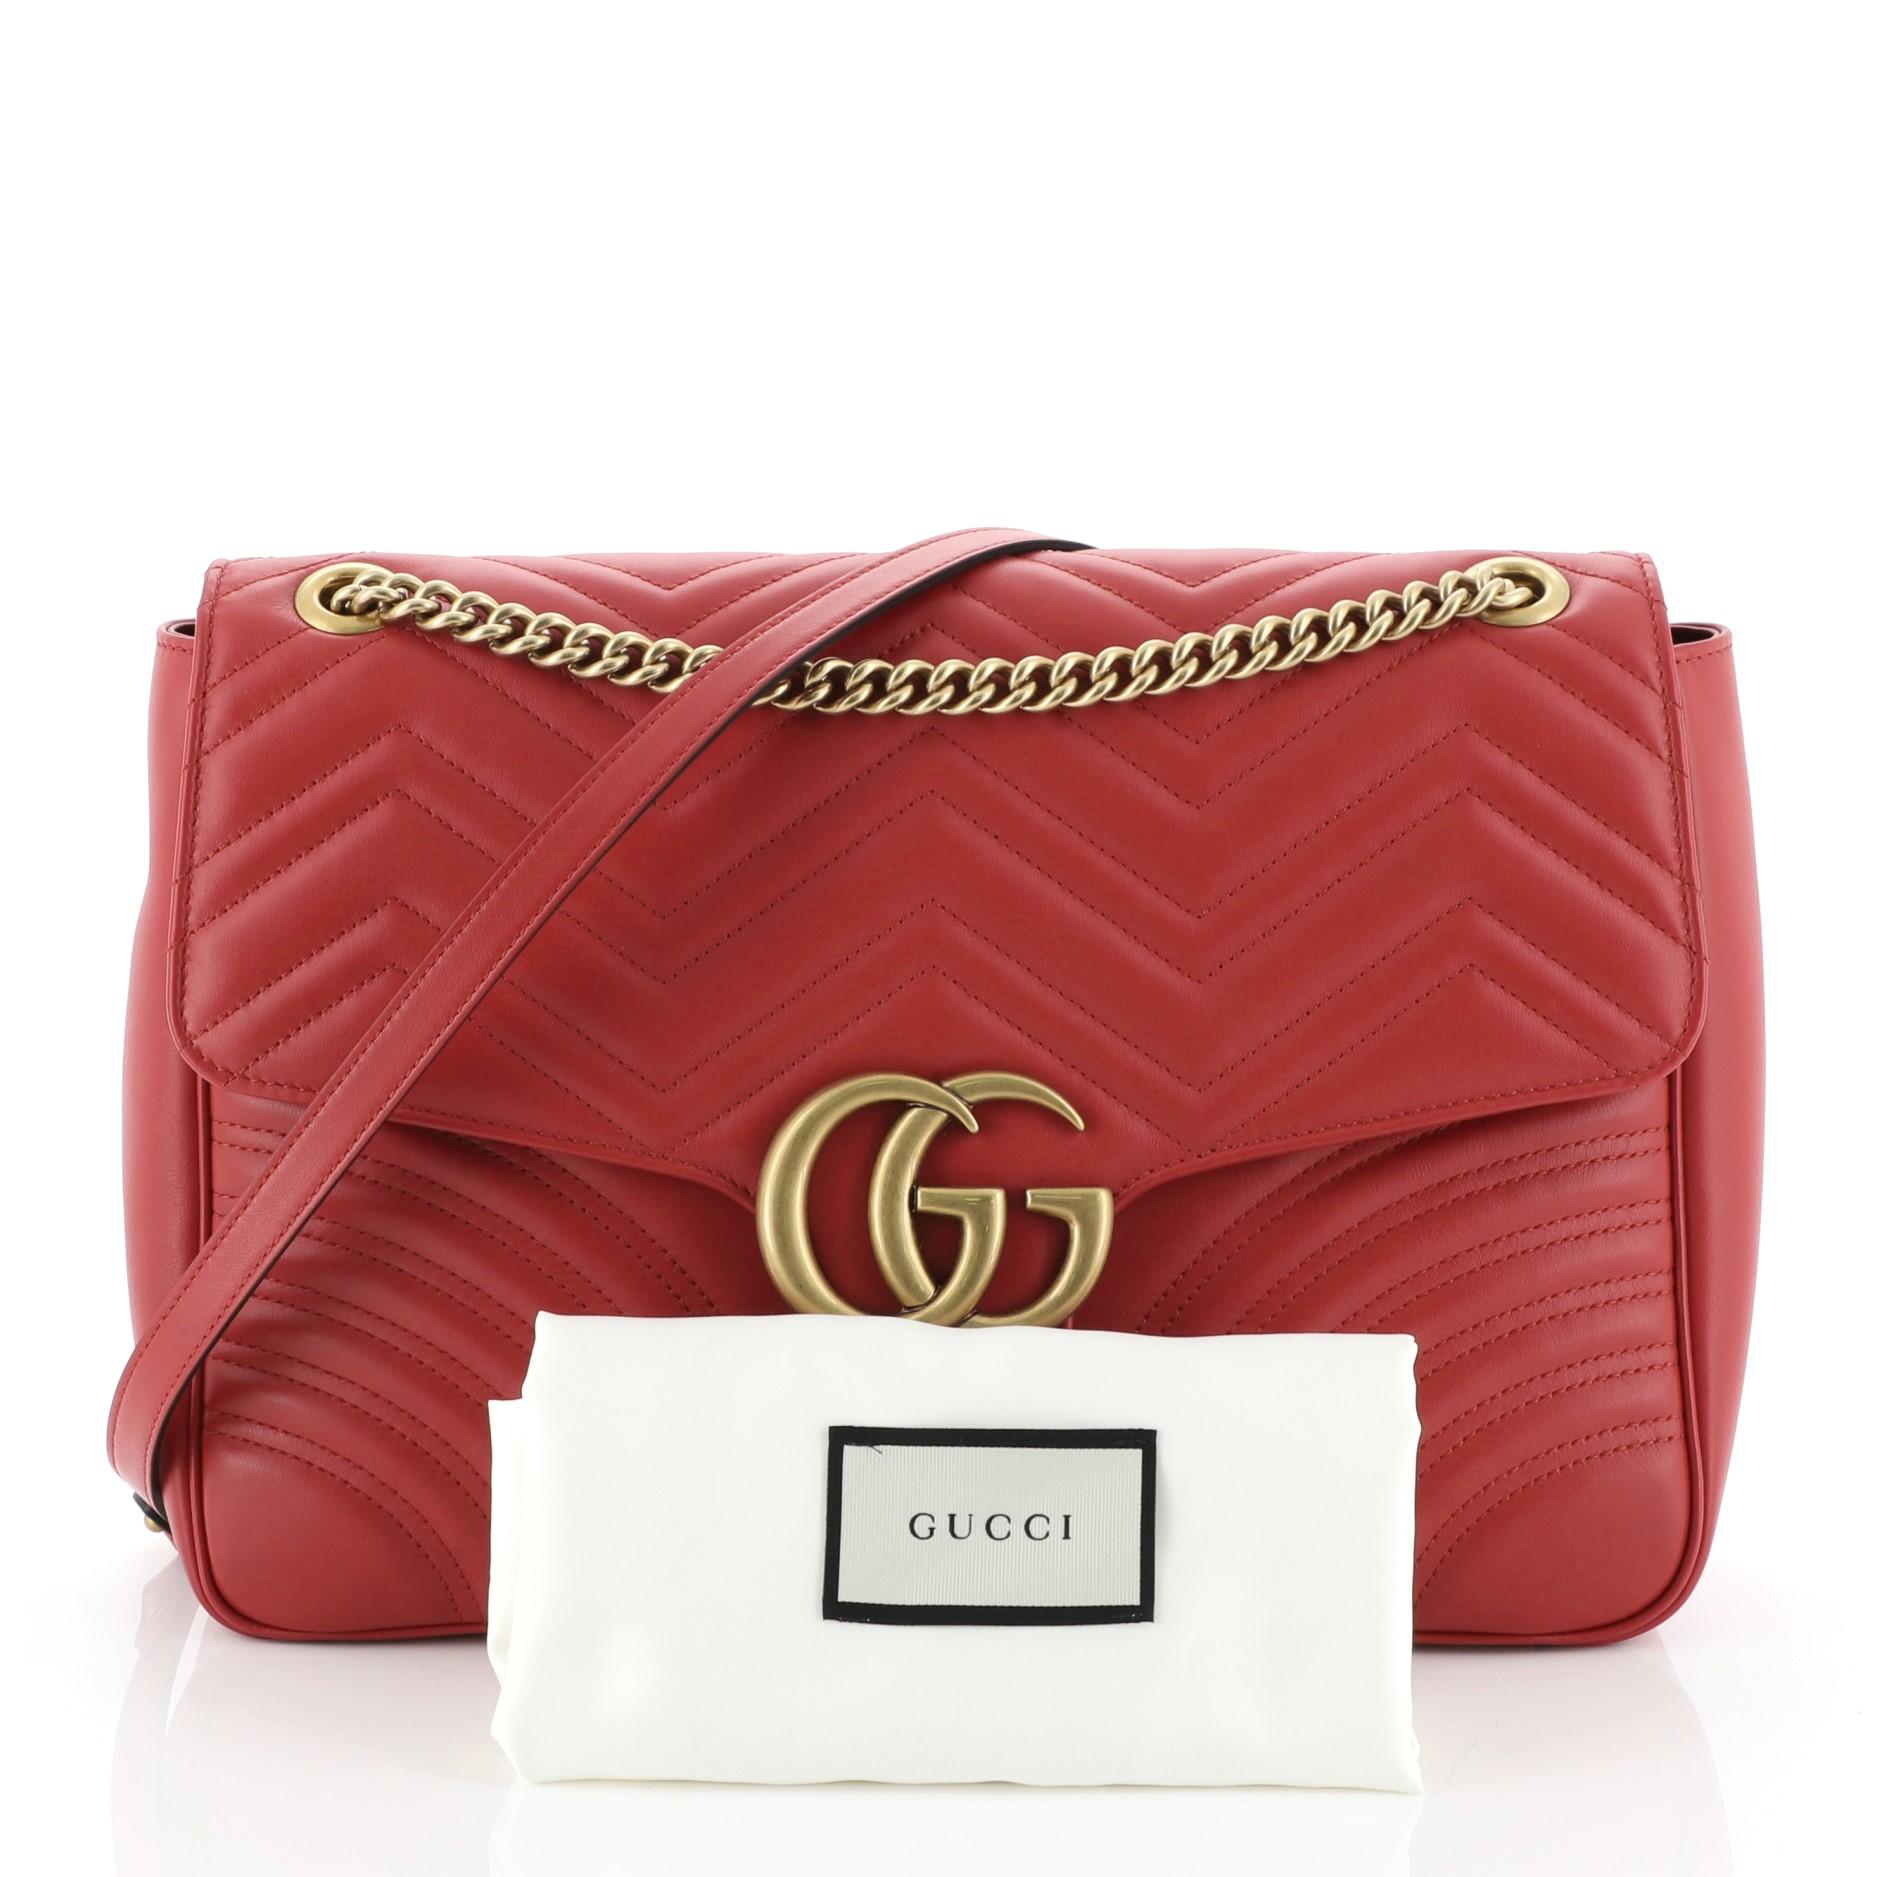 This Gucci GG Marmont Flap Bag Matelasse Leather Large, crafted from red matelasse leather, features a chain-link shoulder strap with leather pad, flap top with GG logo, and aged gold-tone hardware. Its push-lock closure opens to a neutral